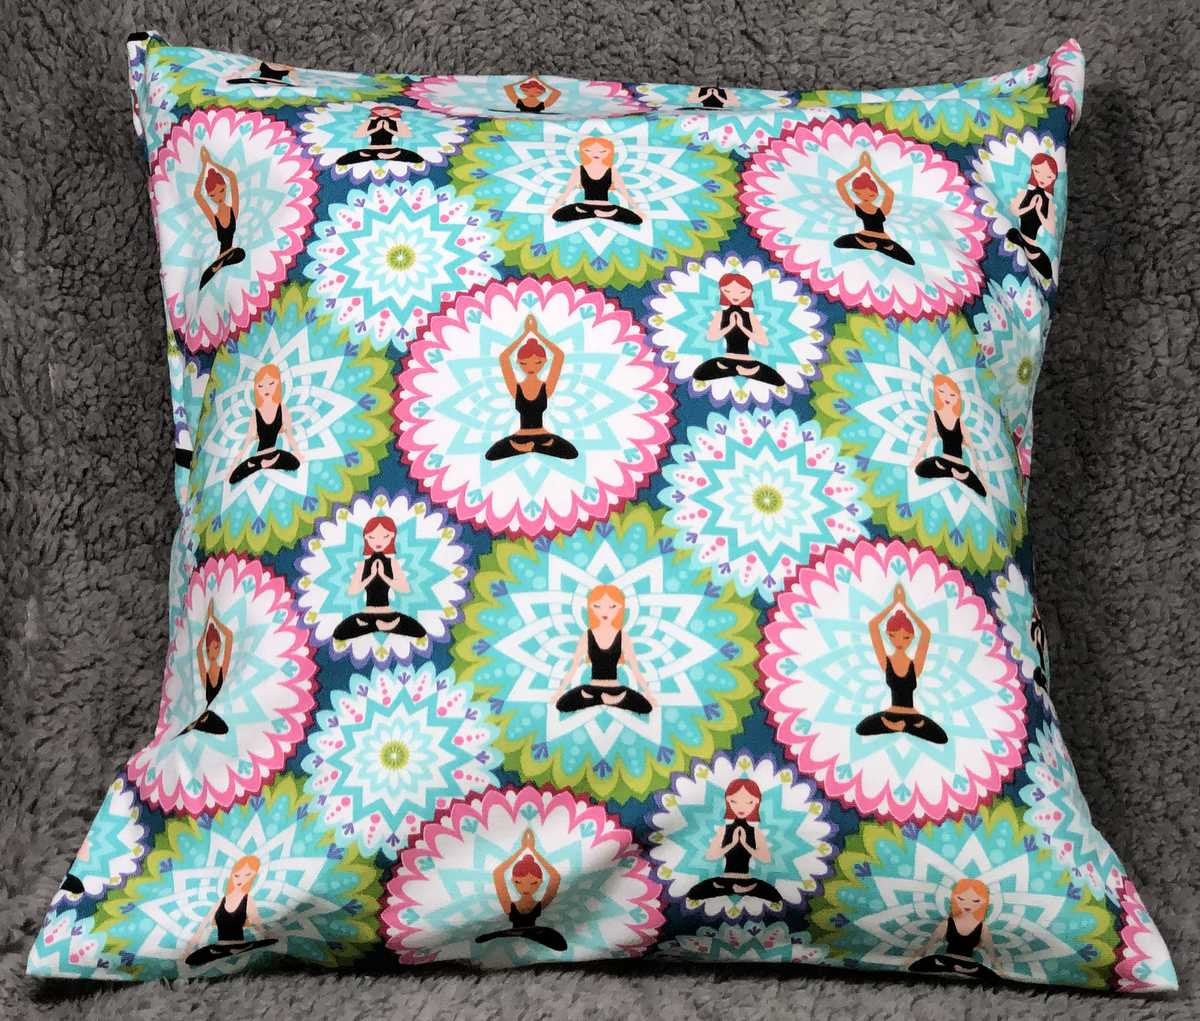 Yoga Meditation Pose Pillow Cover, Workout Camper Sofa Accent Pillow Sham, Farmhouse Pillow Cover, Handcrafted Pillow Cover